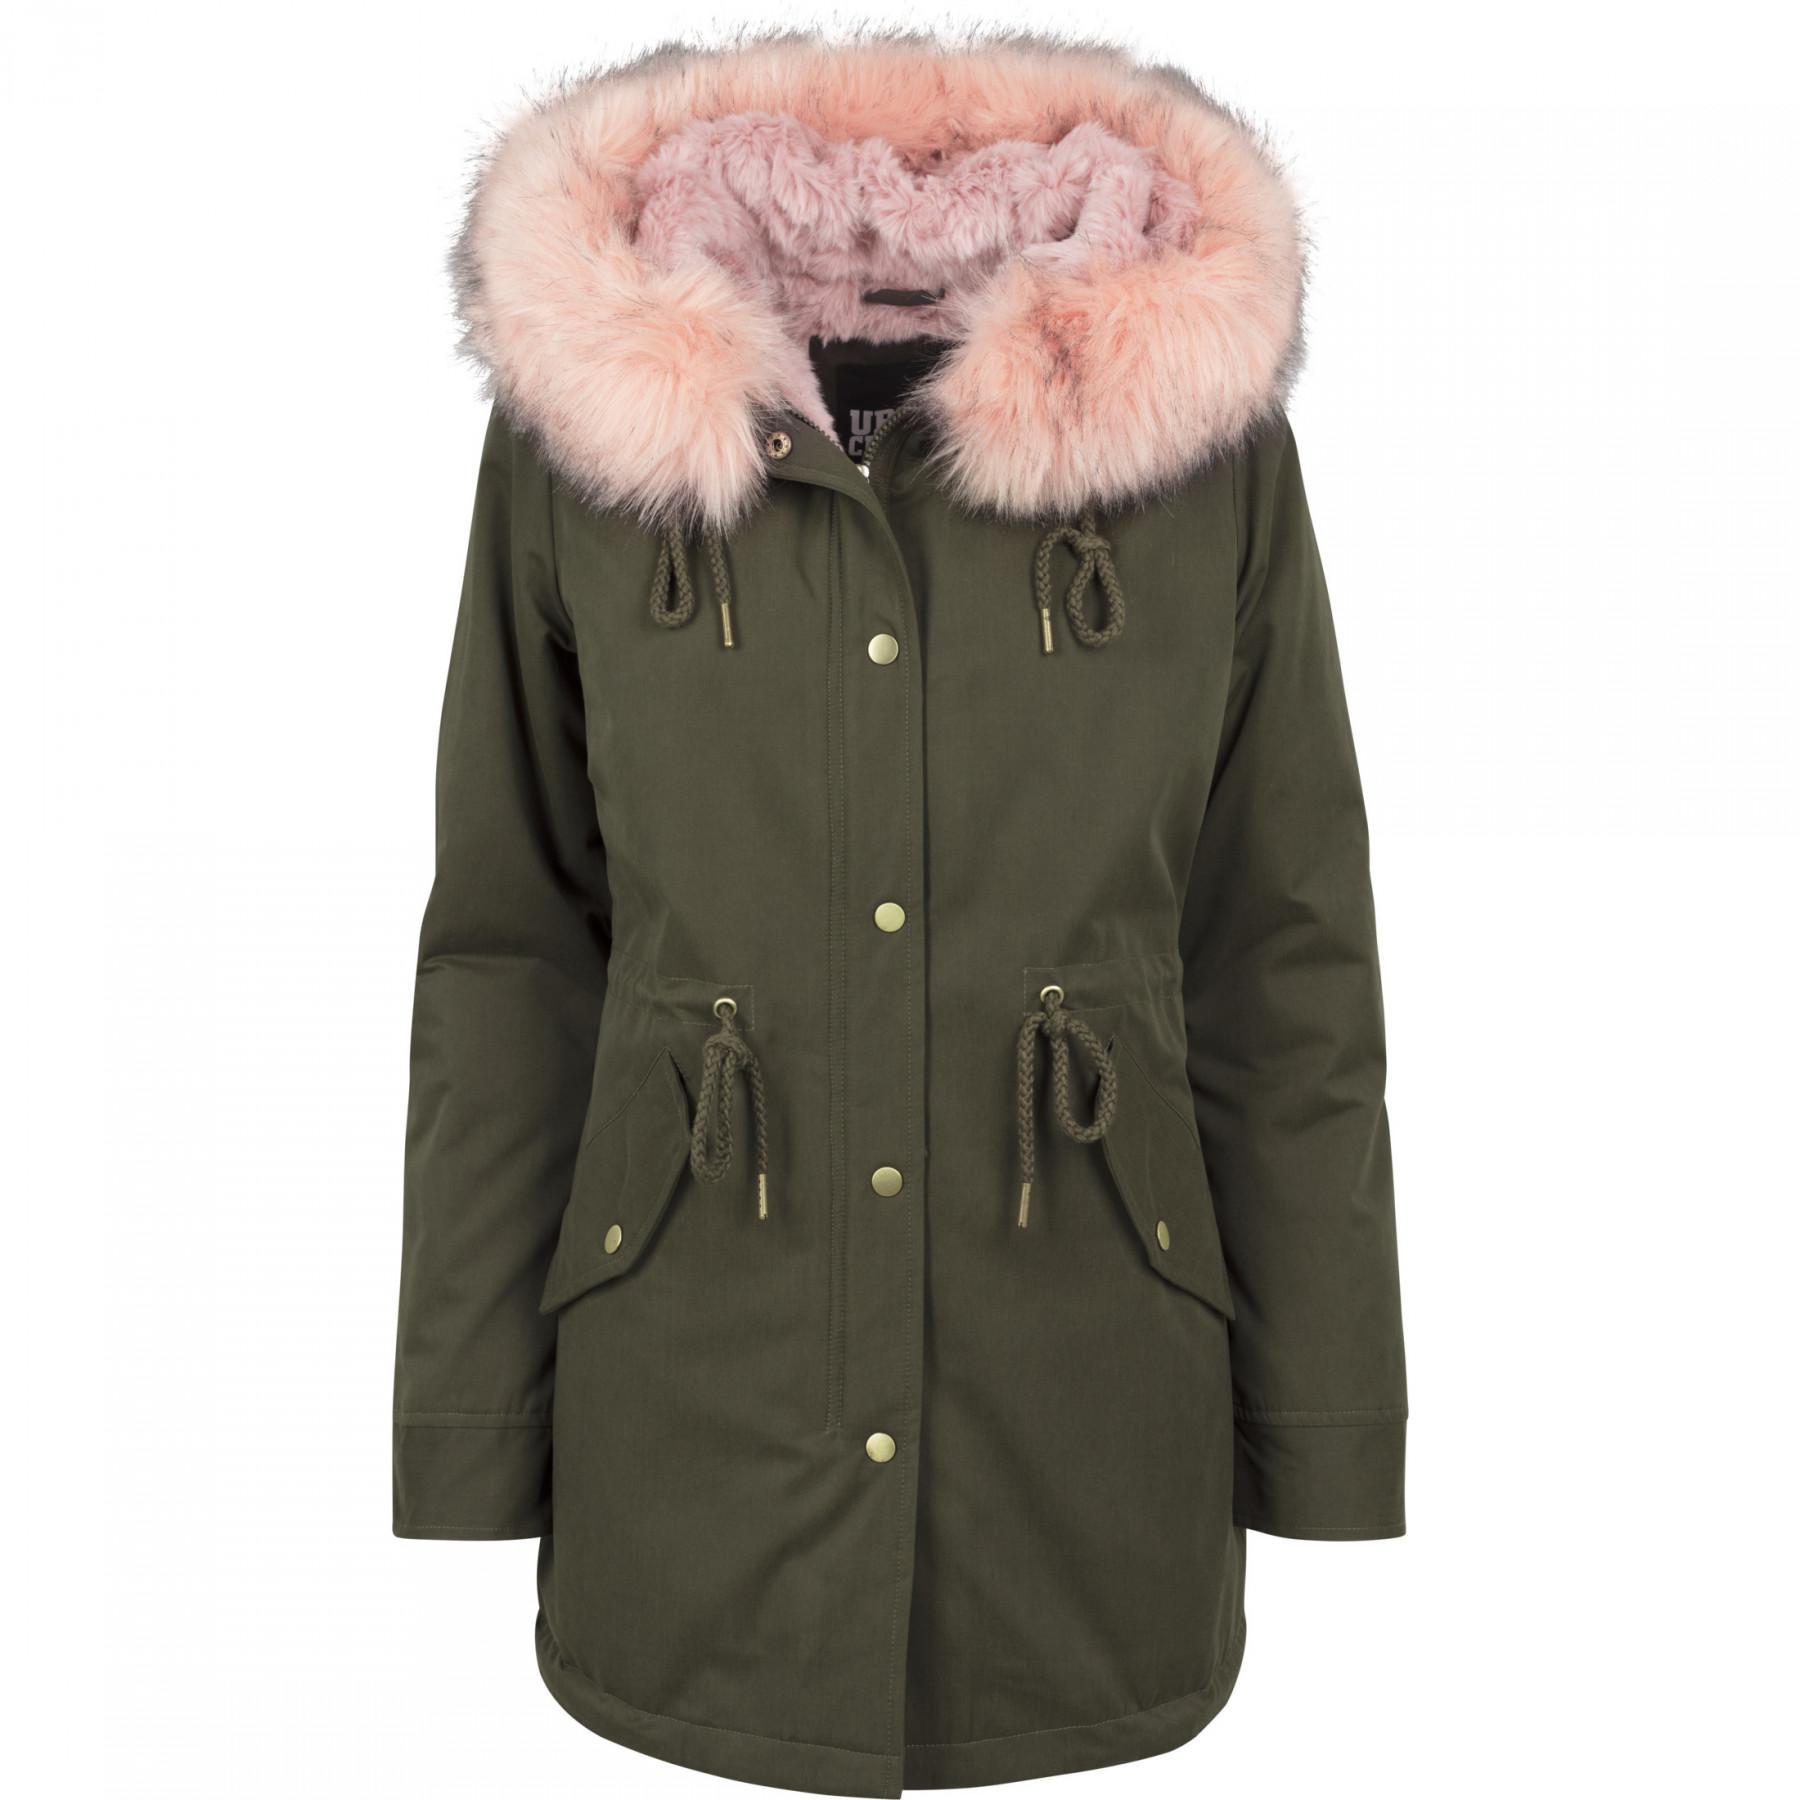 Women's Urban Classic lined parka